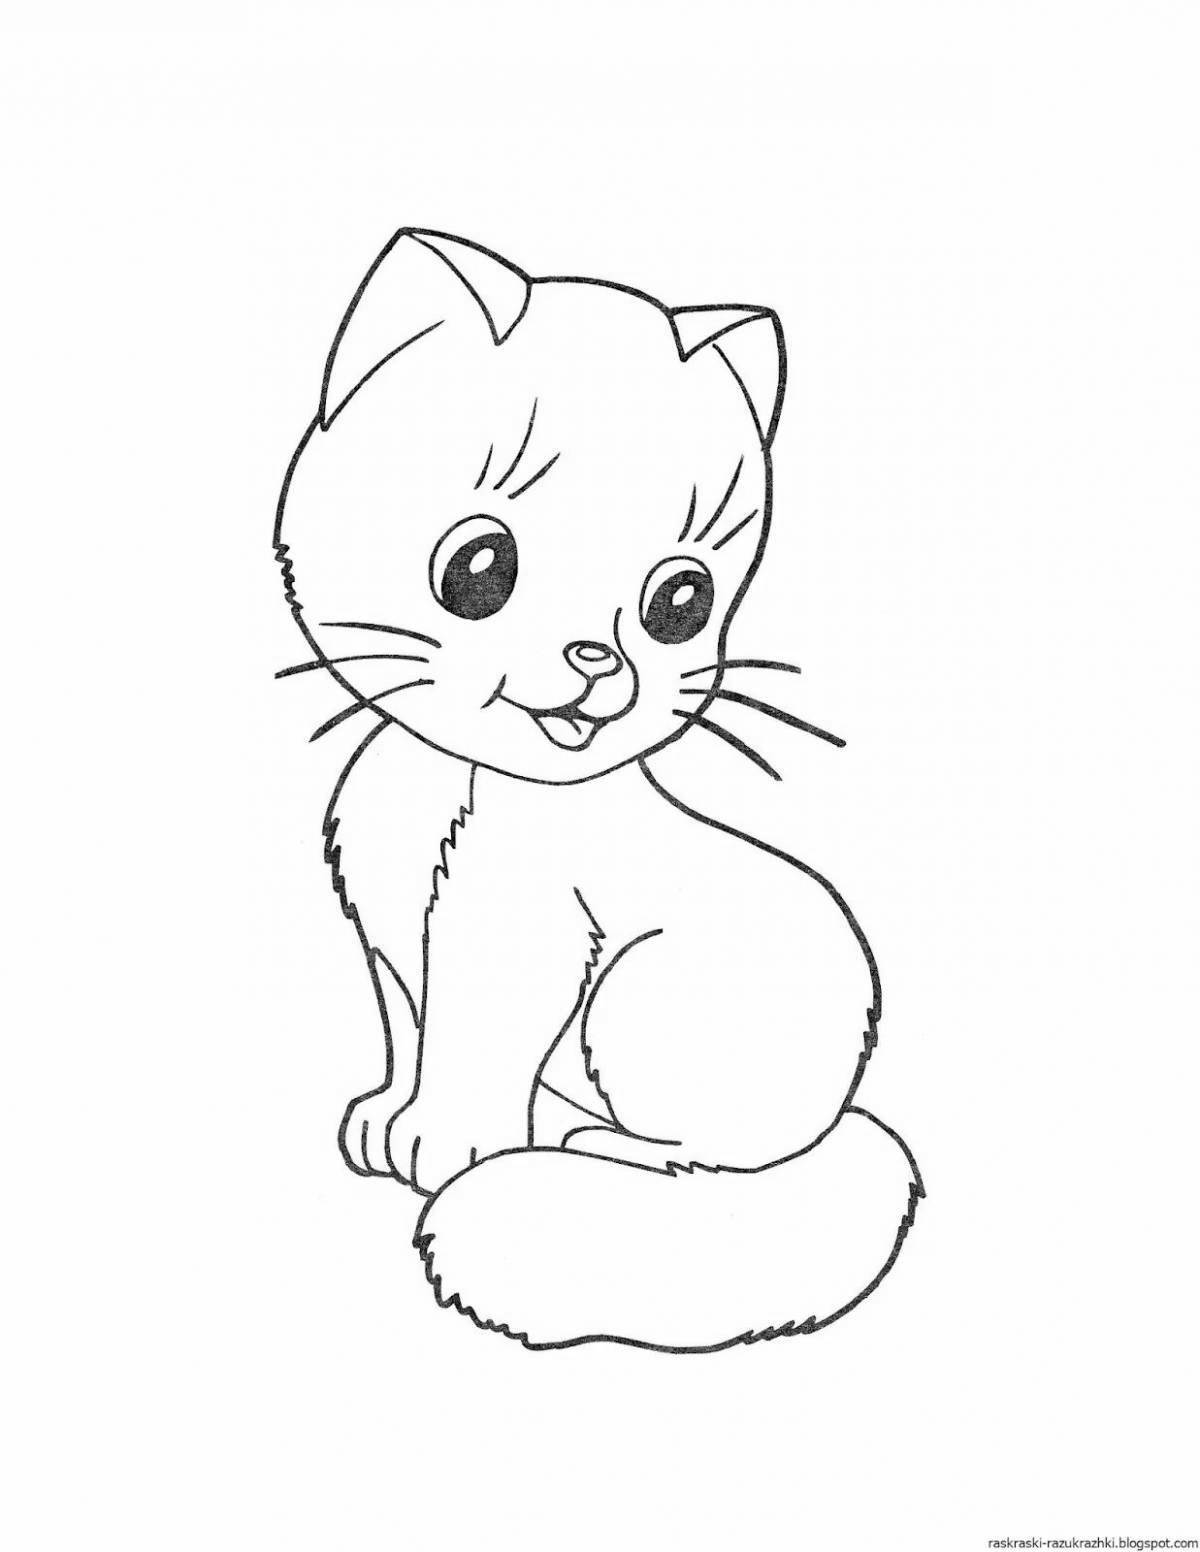 Creative cat coloring page for kids